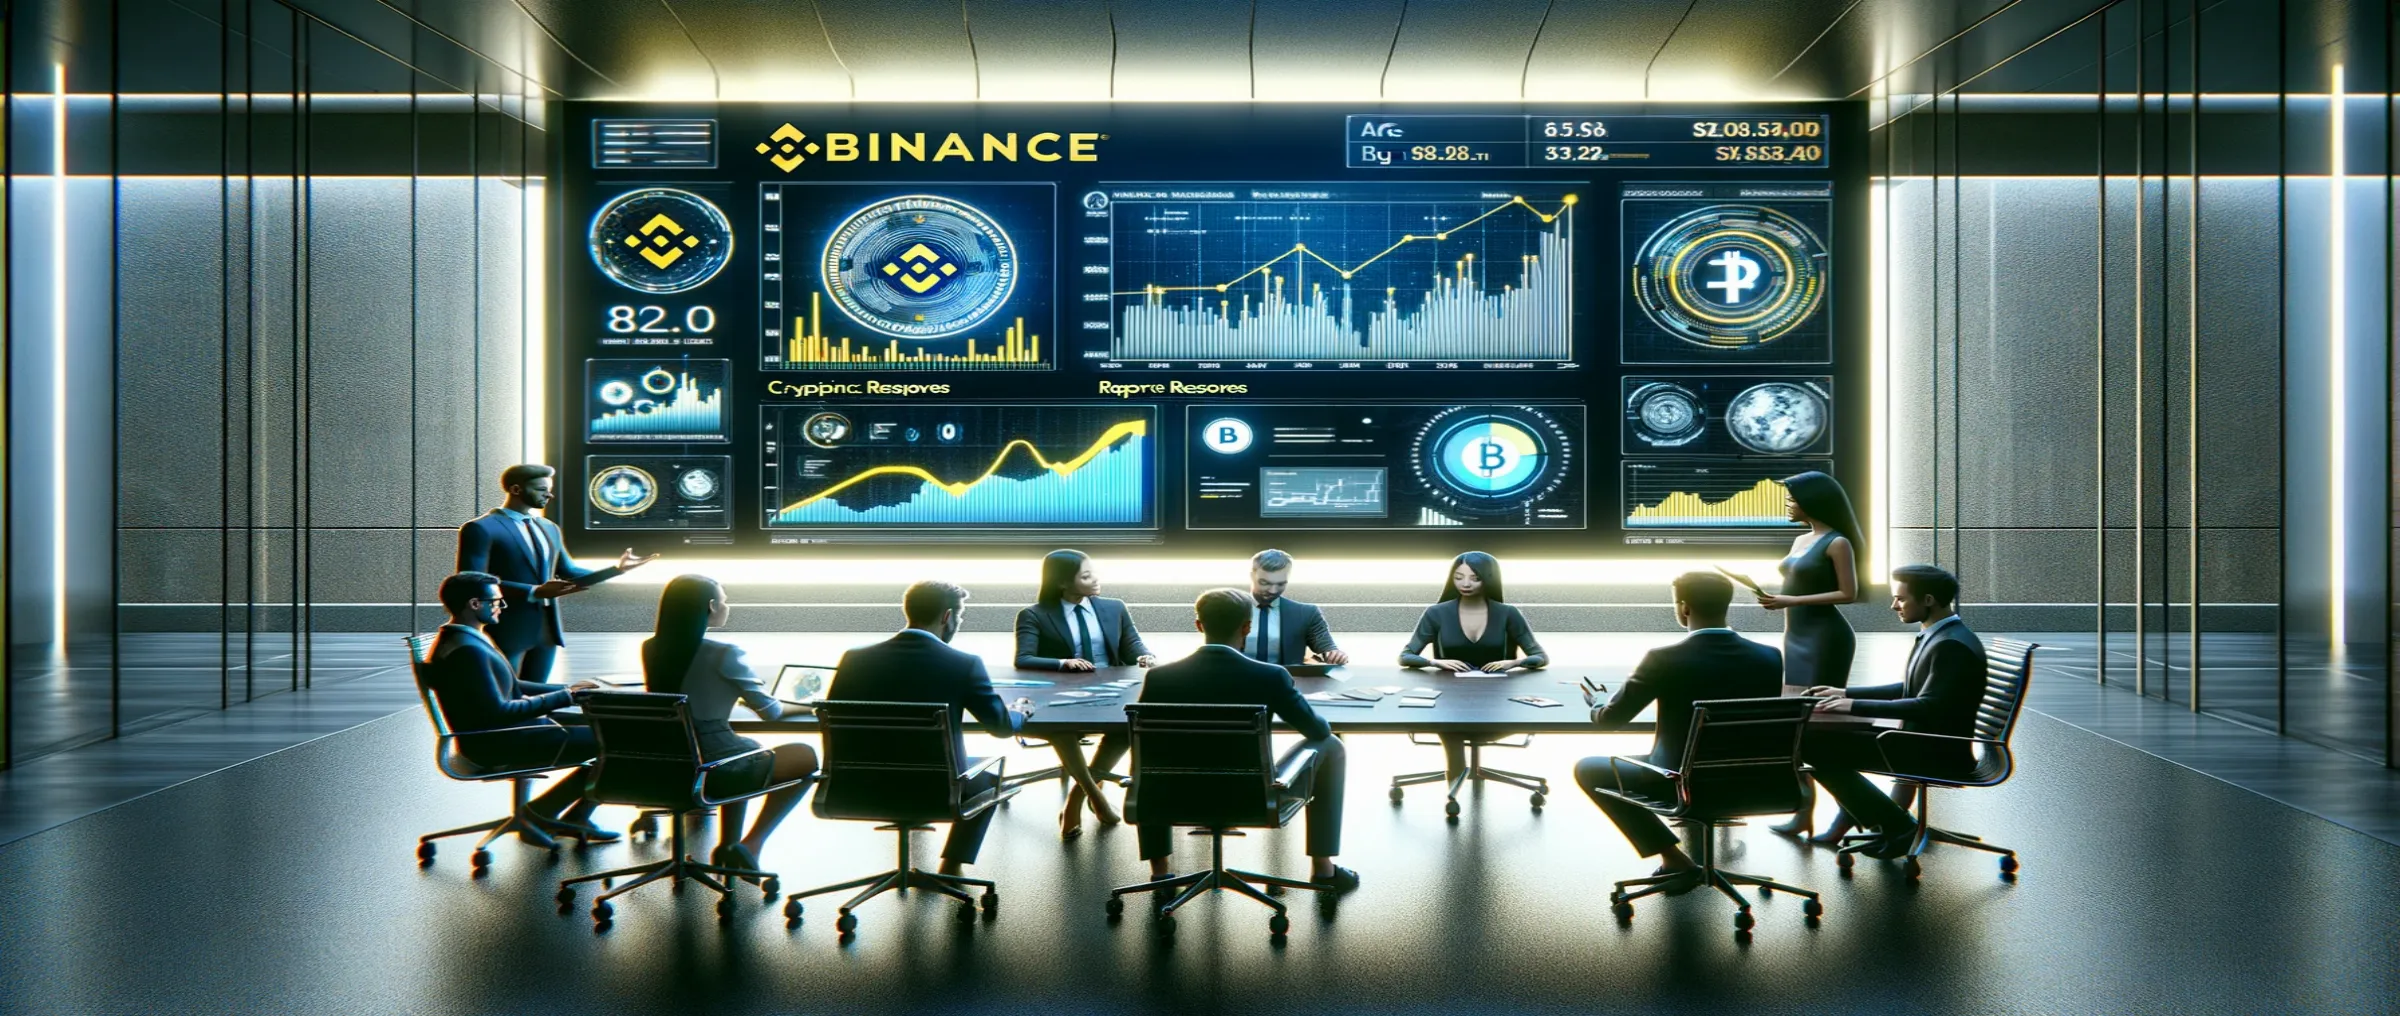 Binance Exchange has presented a new report on its reserves